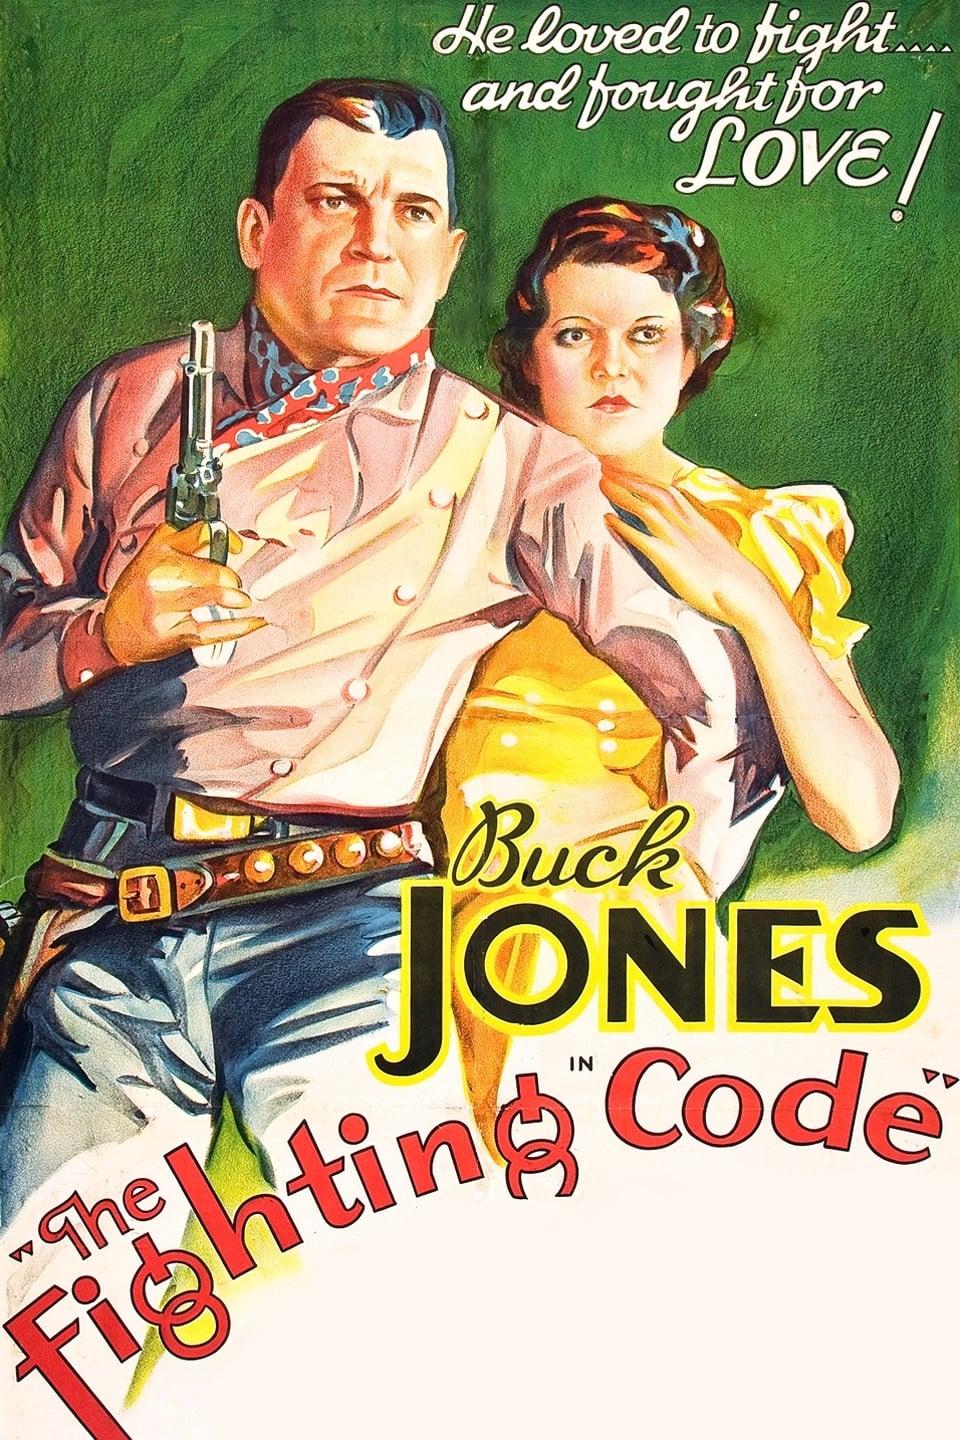 The Fighting Code poster